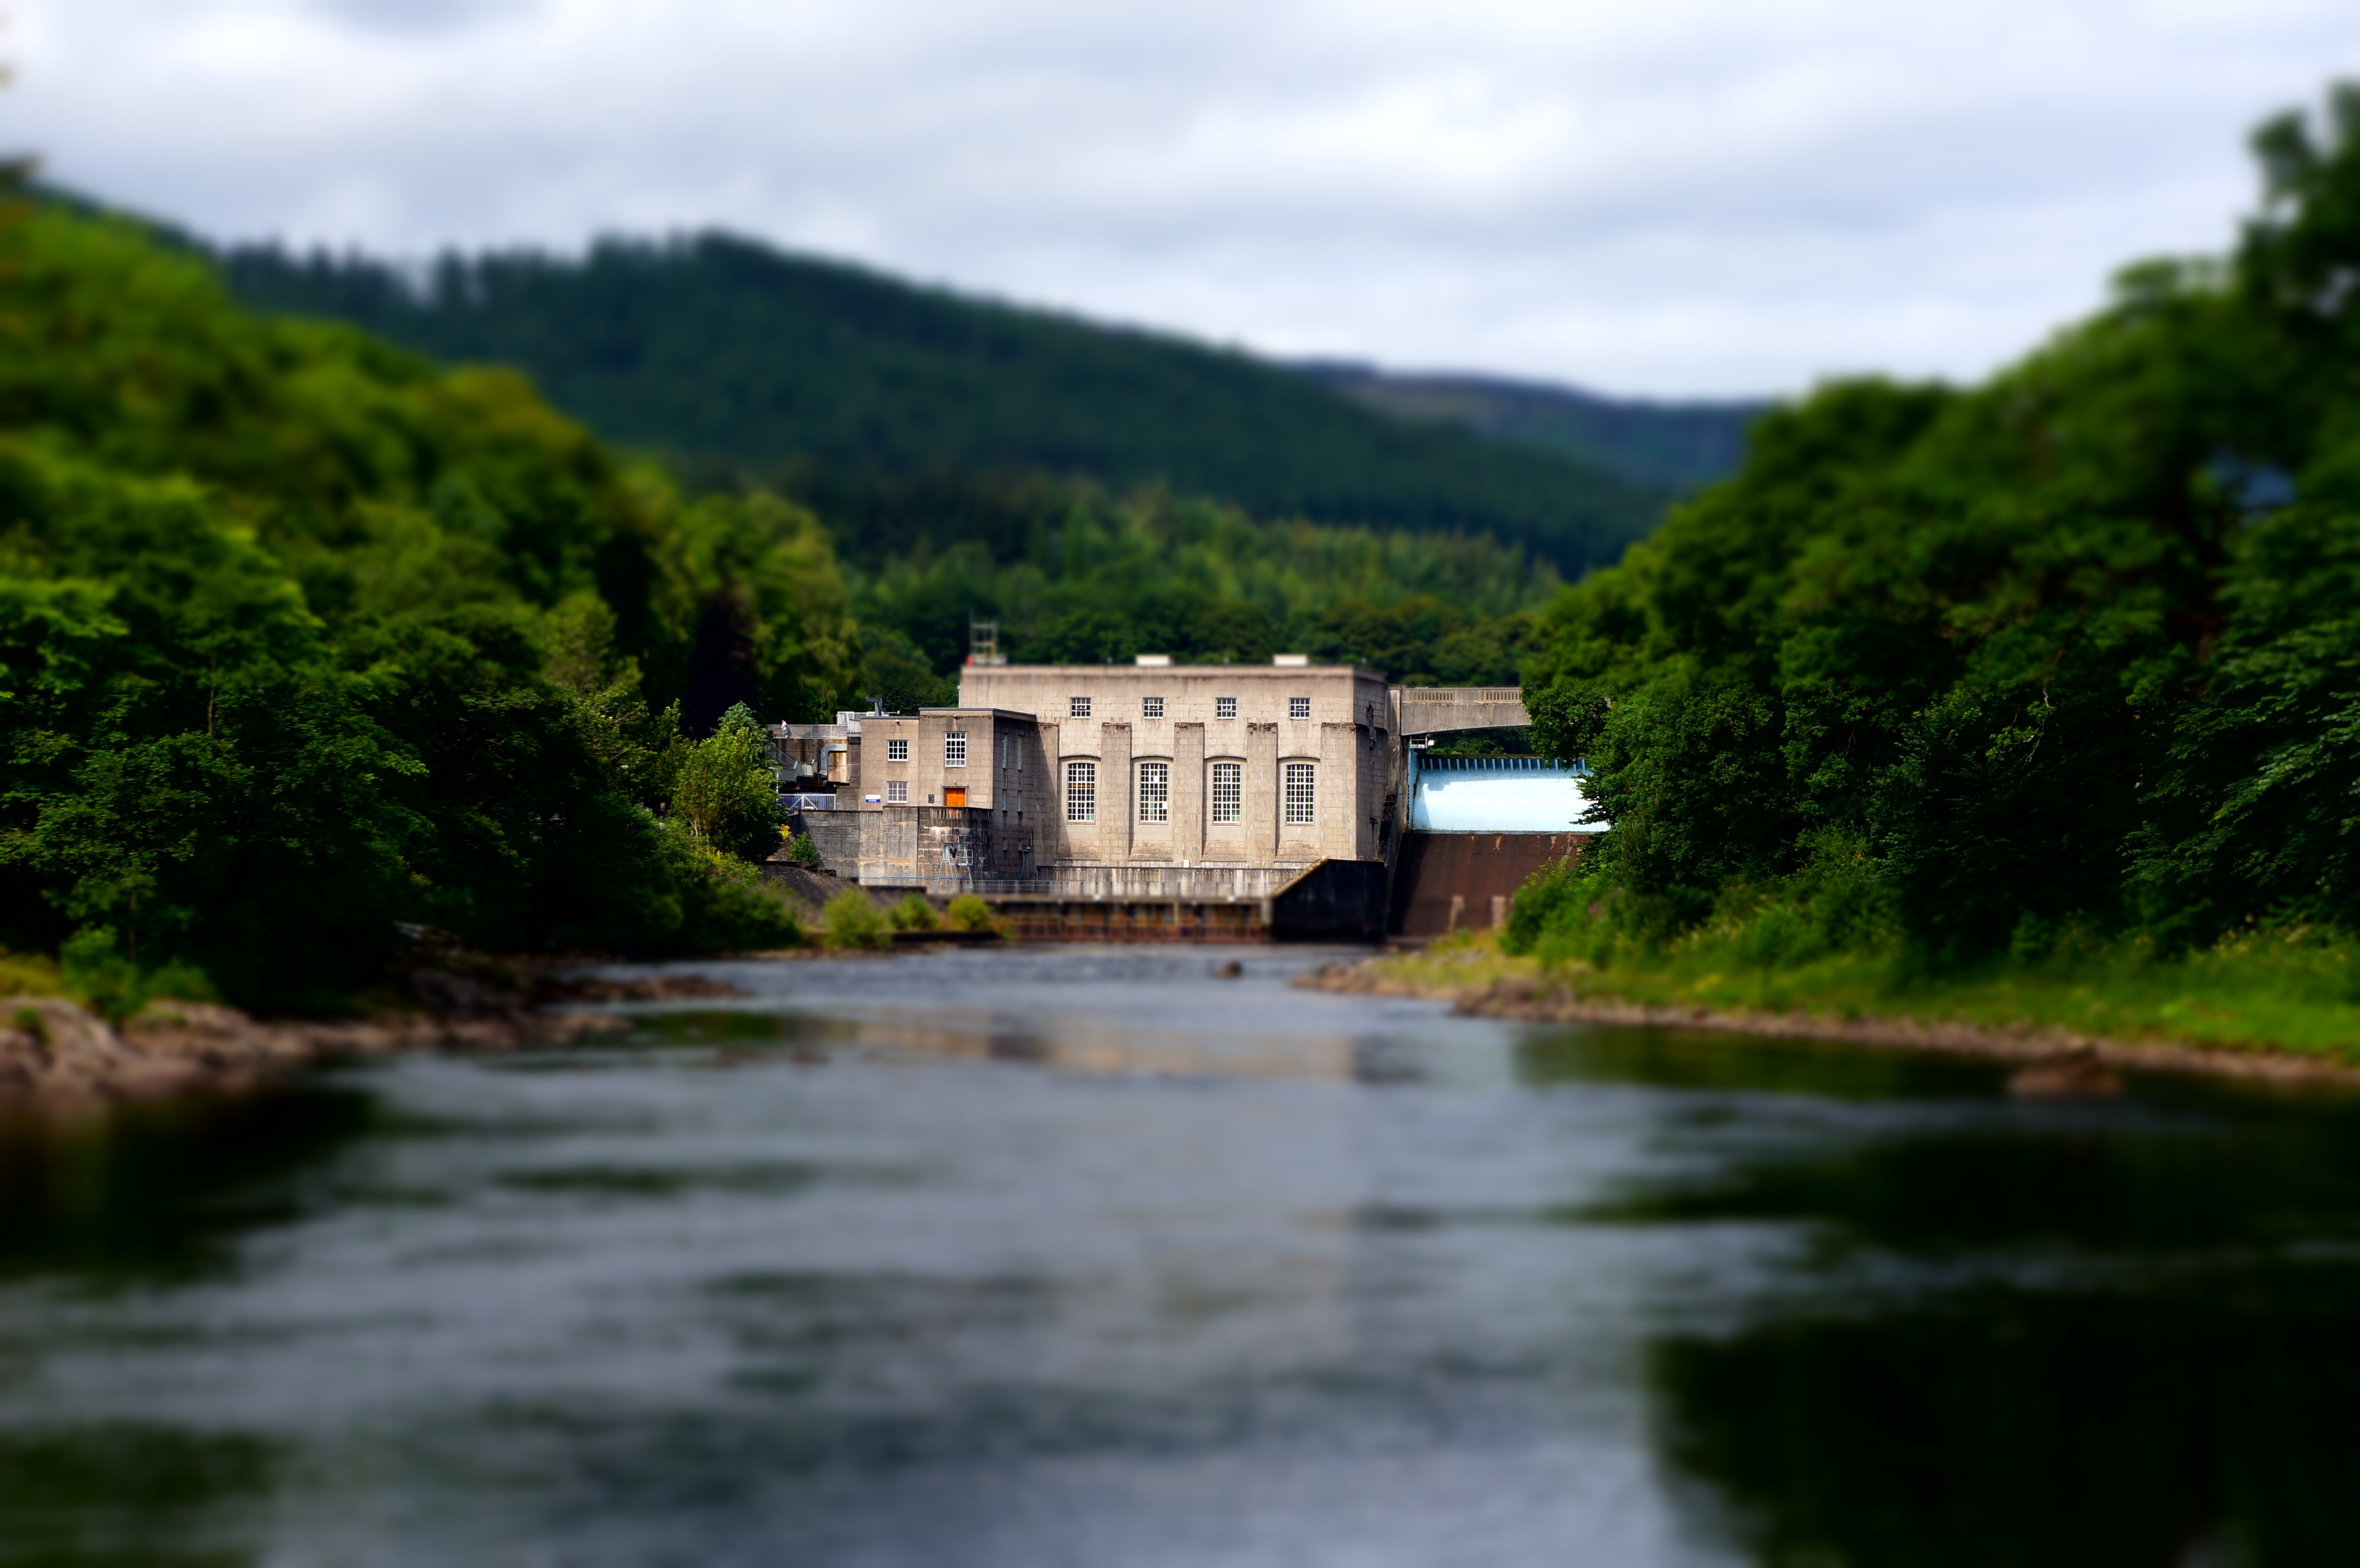 Best Hydroelectricity Photo · 100% Free Downloads